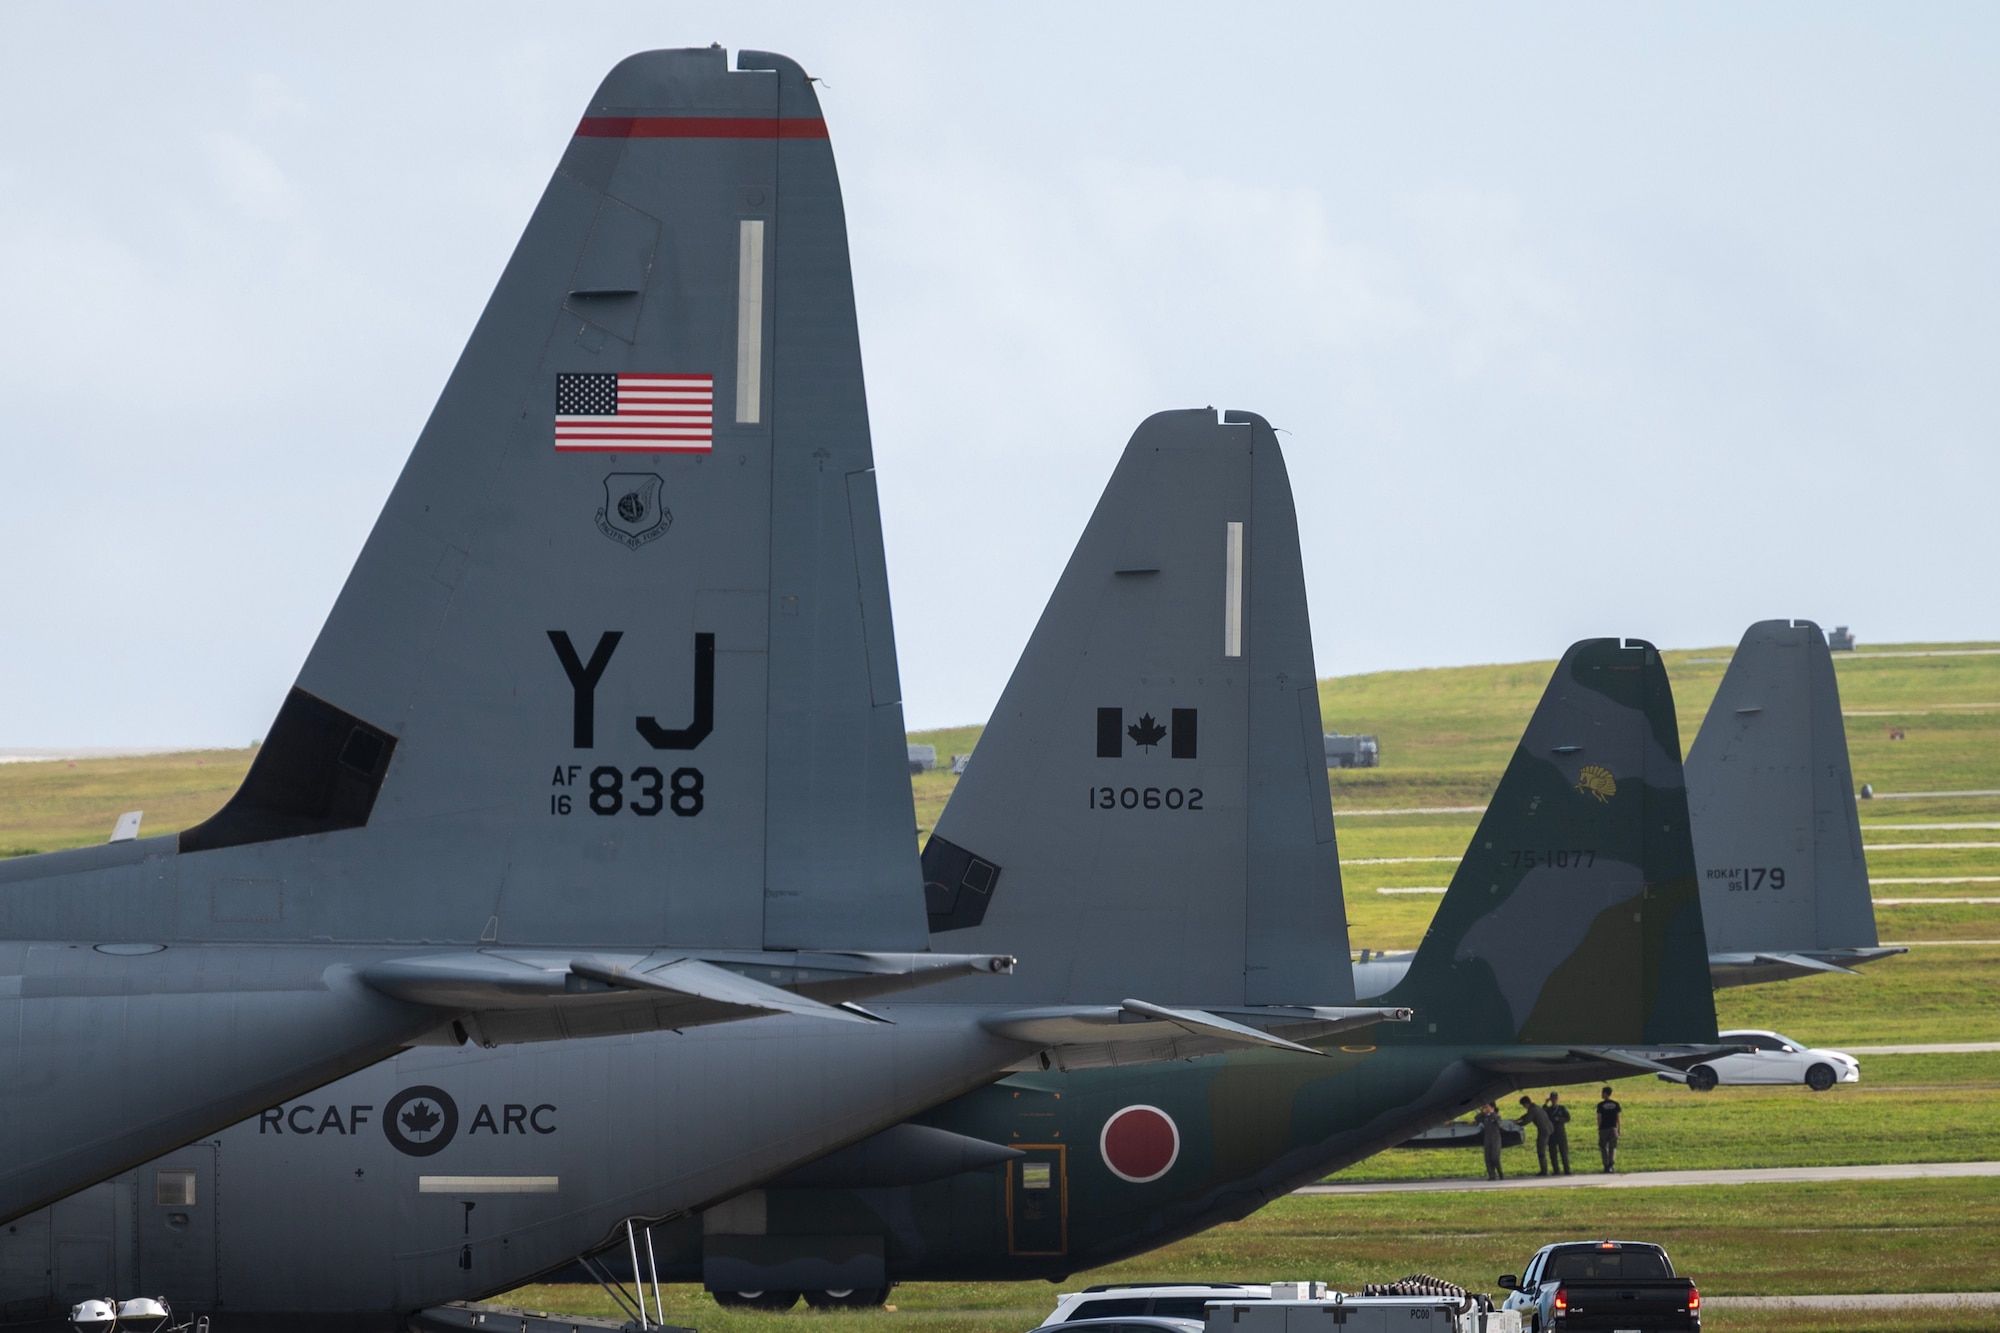 Photo of Cargo aircraft from Japan, U.S., Canada, and the Republic of Korea are lined up together before flight.